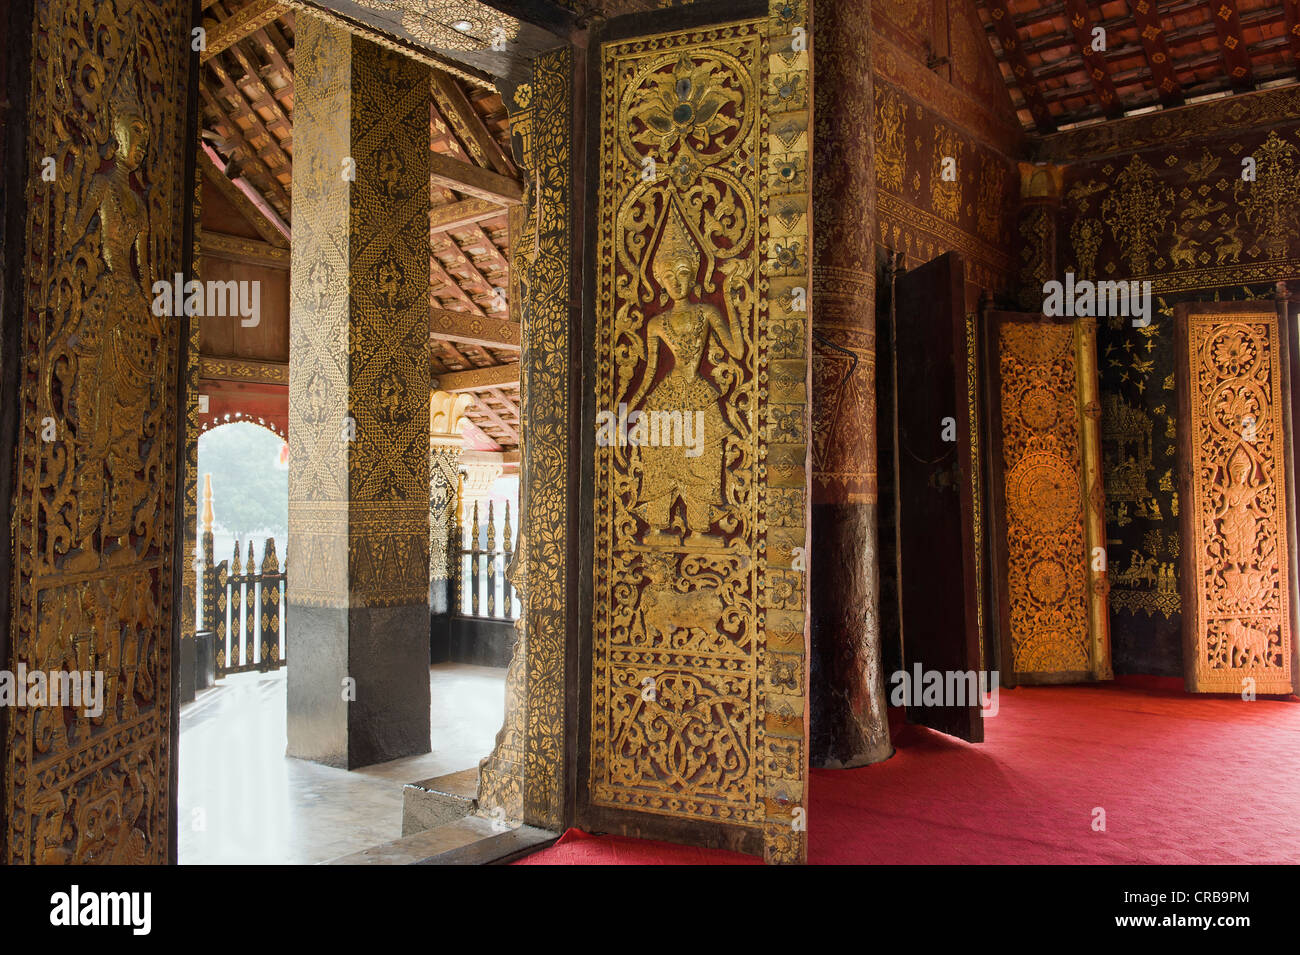 Entrance door ornamented with gold reliefs, Wat Xieng Thong temple, Luang Prabang, Laos, Indochina, Asia Stock Photo